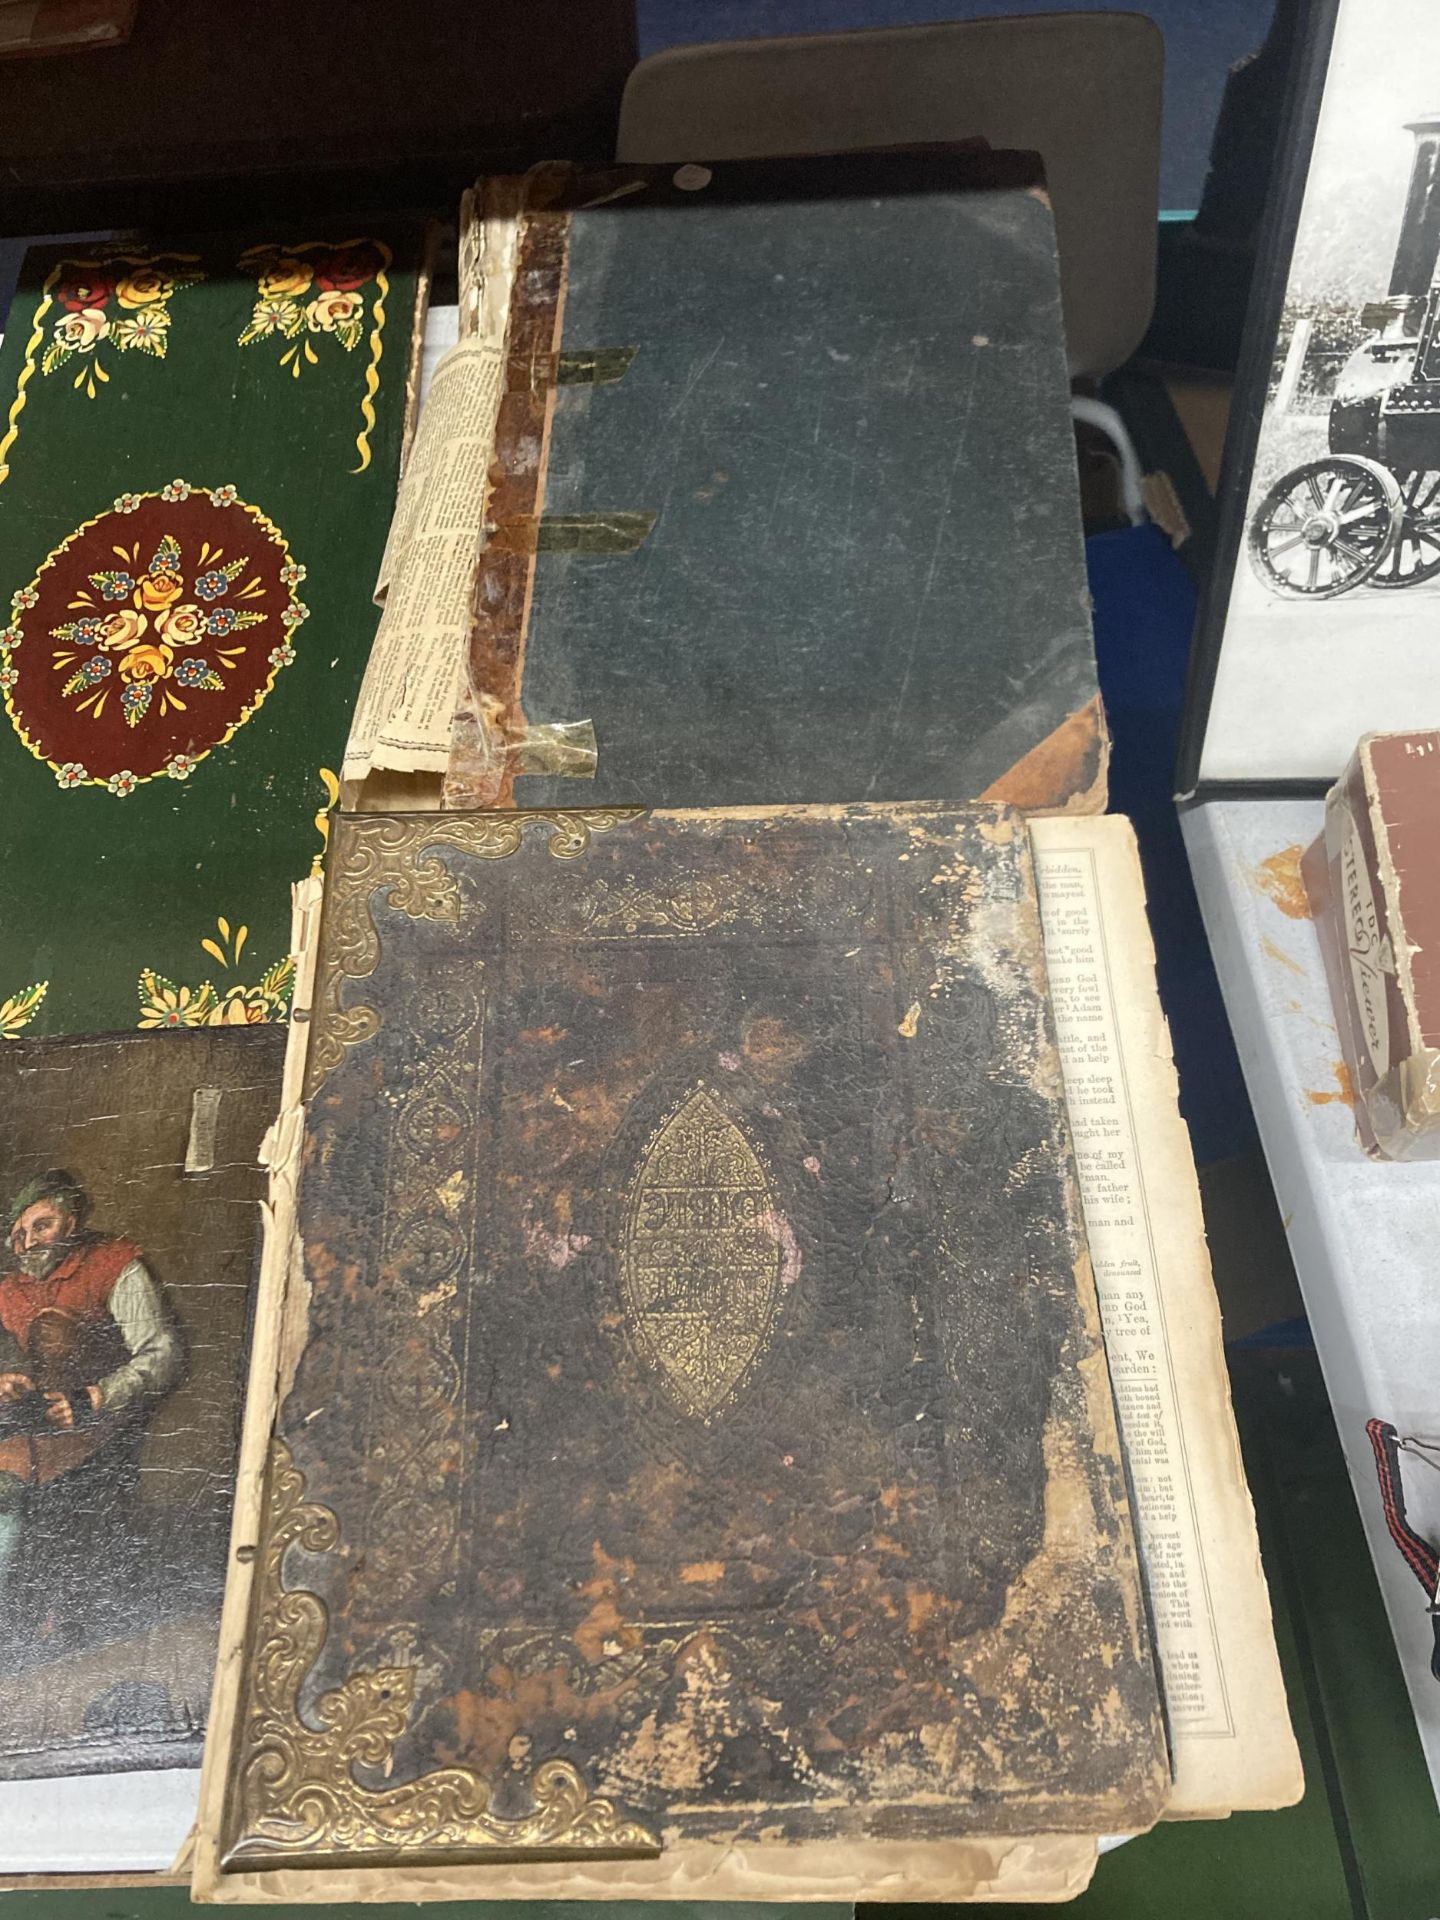 TWO EARLY HARDBACK HOLY BIBLES TO INCLUDE THE OLD AND NEW TESTHMENTS, THE SACRED TEXT OF THE OLD